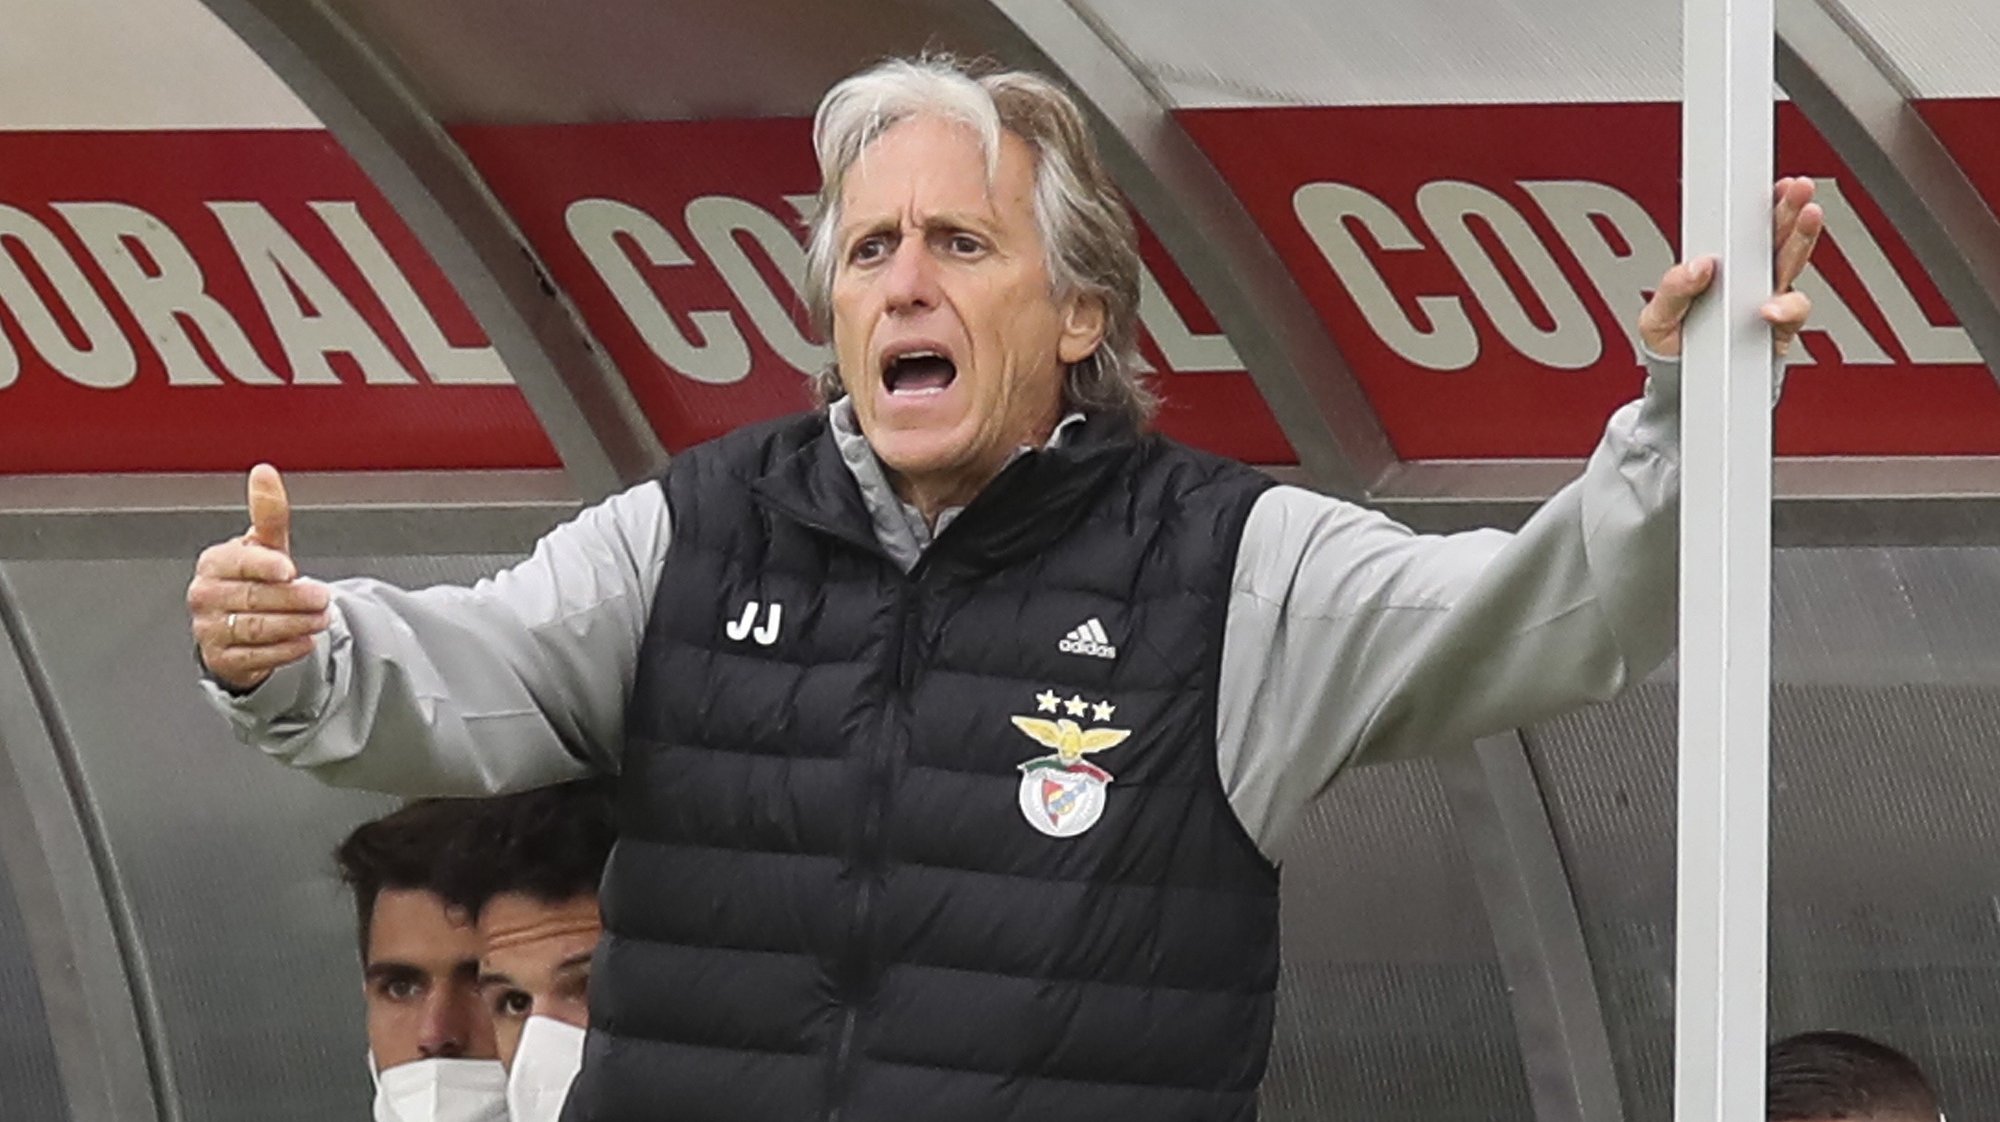 Benfica head coach Jorge Jesus reacts during the Portuguese First League soccer match against Nacional held at Madeira Stadium, in Funchal, Madeira Island, Portugal, 11 may 2021.  HOMEM DE GOUVEIA/LUSA